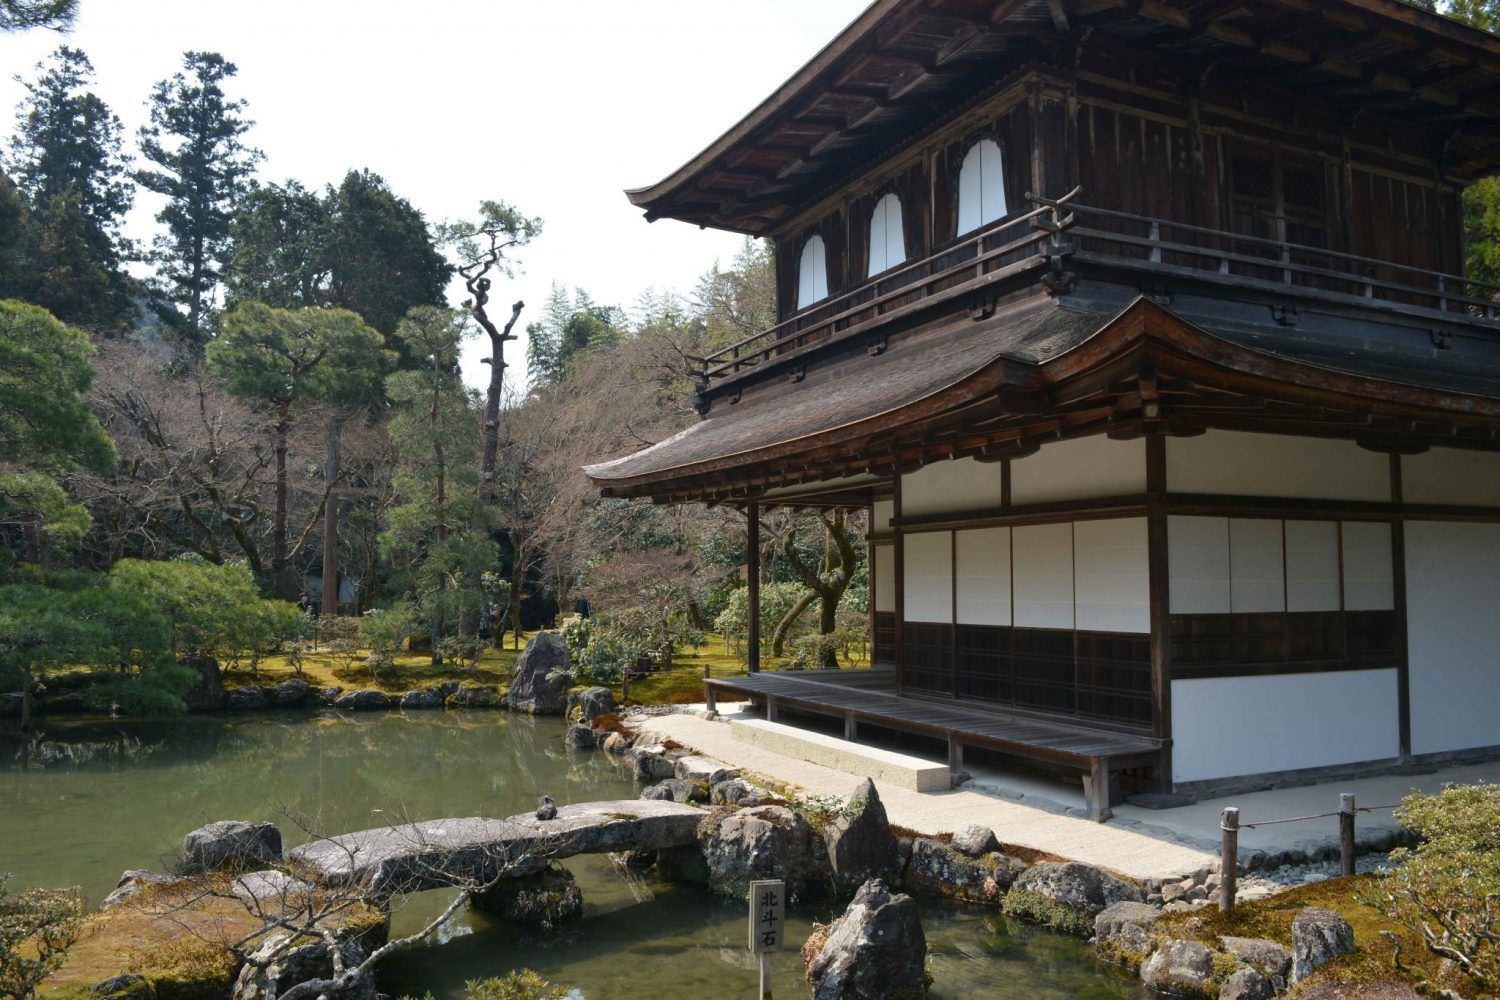 things to do in Kyoto